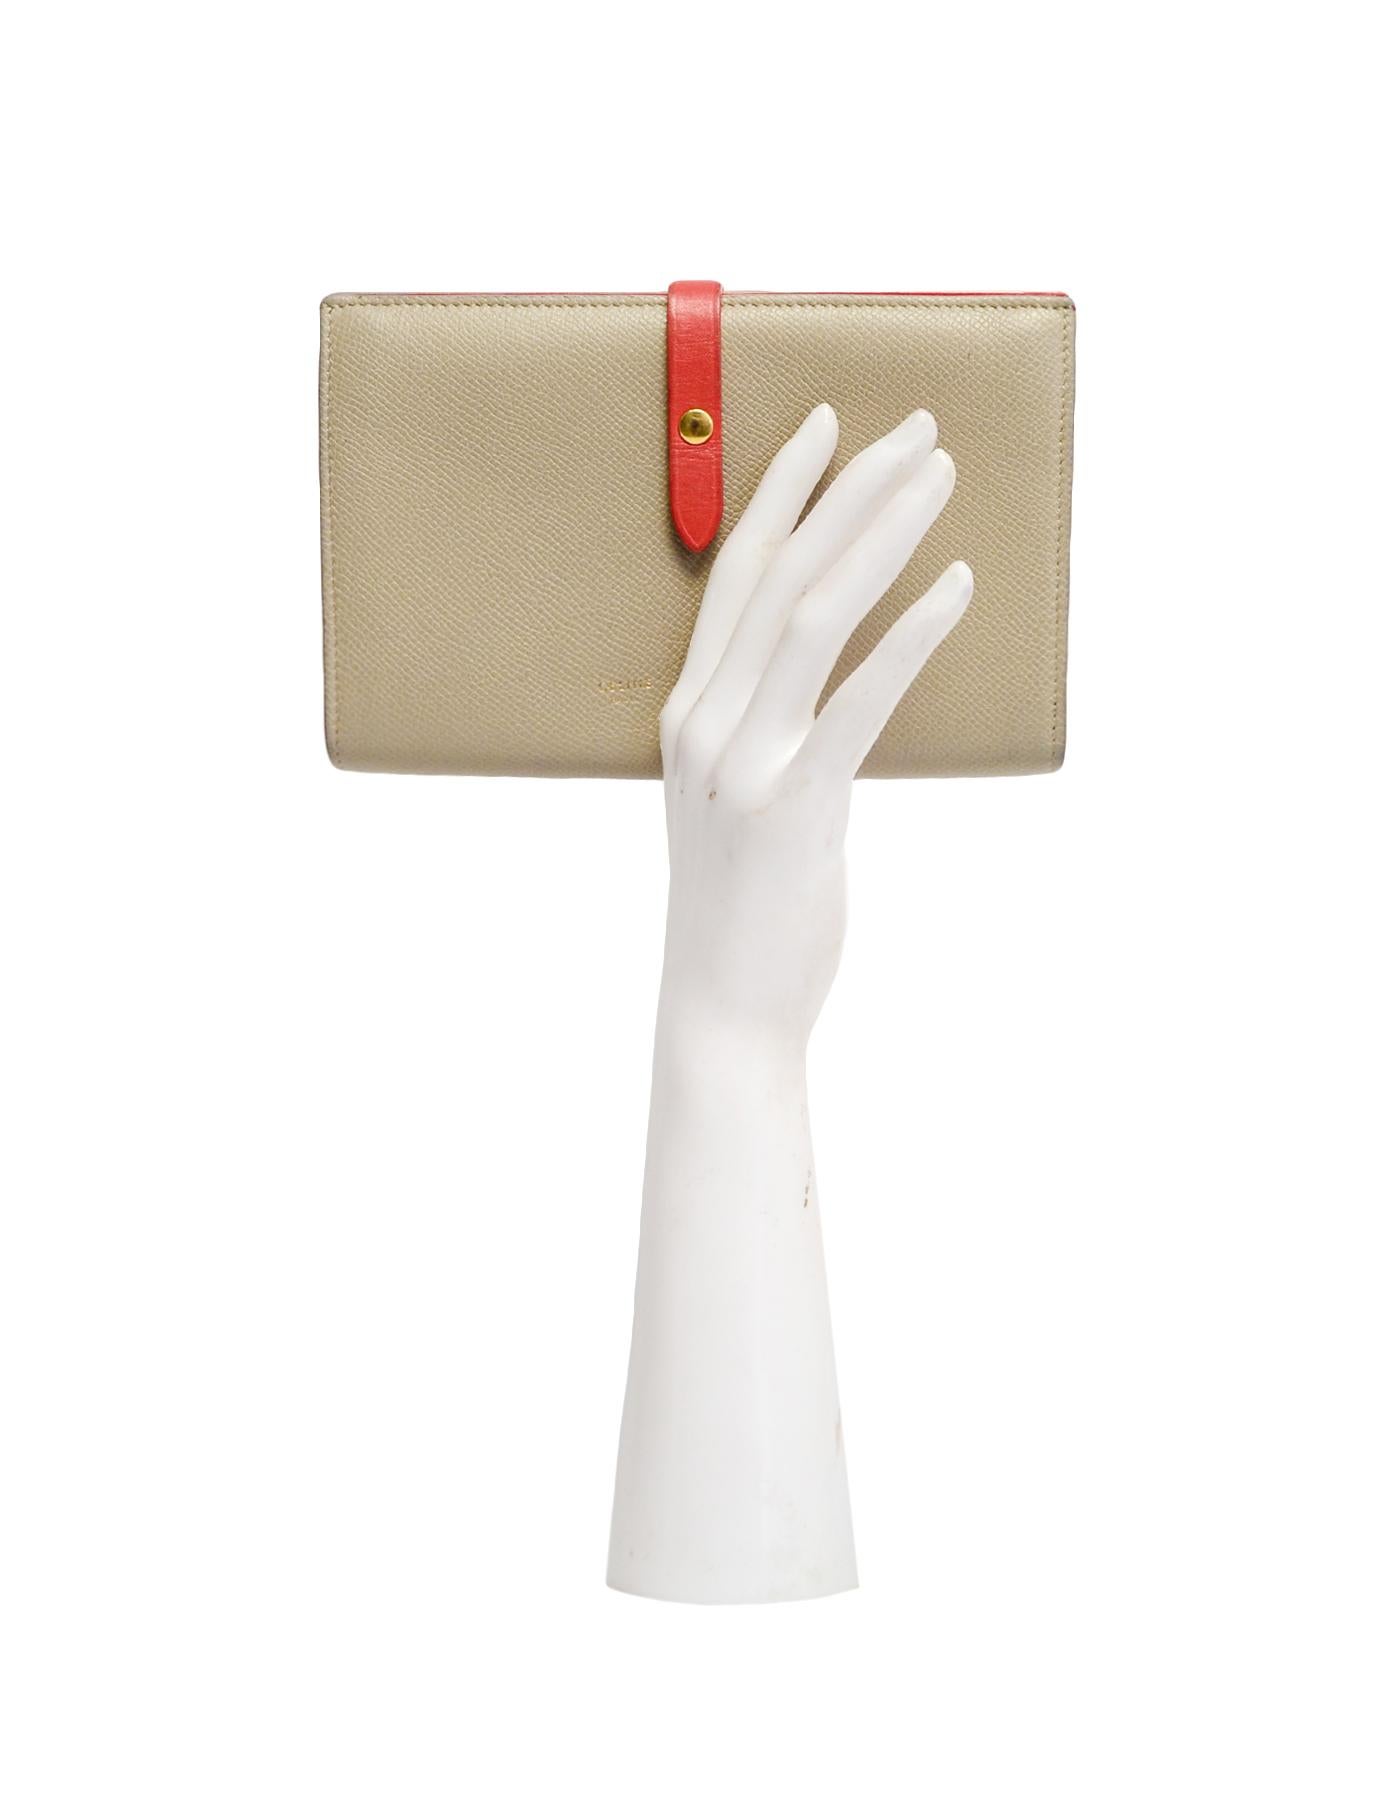 Celine Taupe/Red Grained Calfskin Large Multifunction Strap Wallet rt $810

Made In: Italy
Color: Taupe, red
Hardware: Goldtone hardware
Materials: Calfskin leather
Lining: Taupe suede lining
Closure/Opening: Strap with snap closure
Exterior